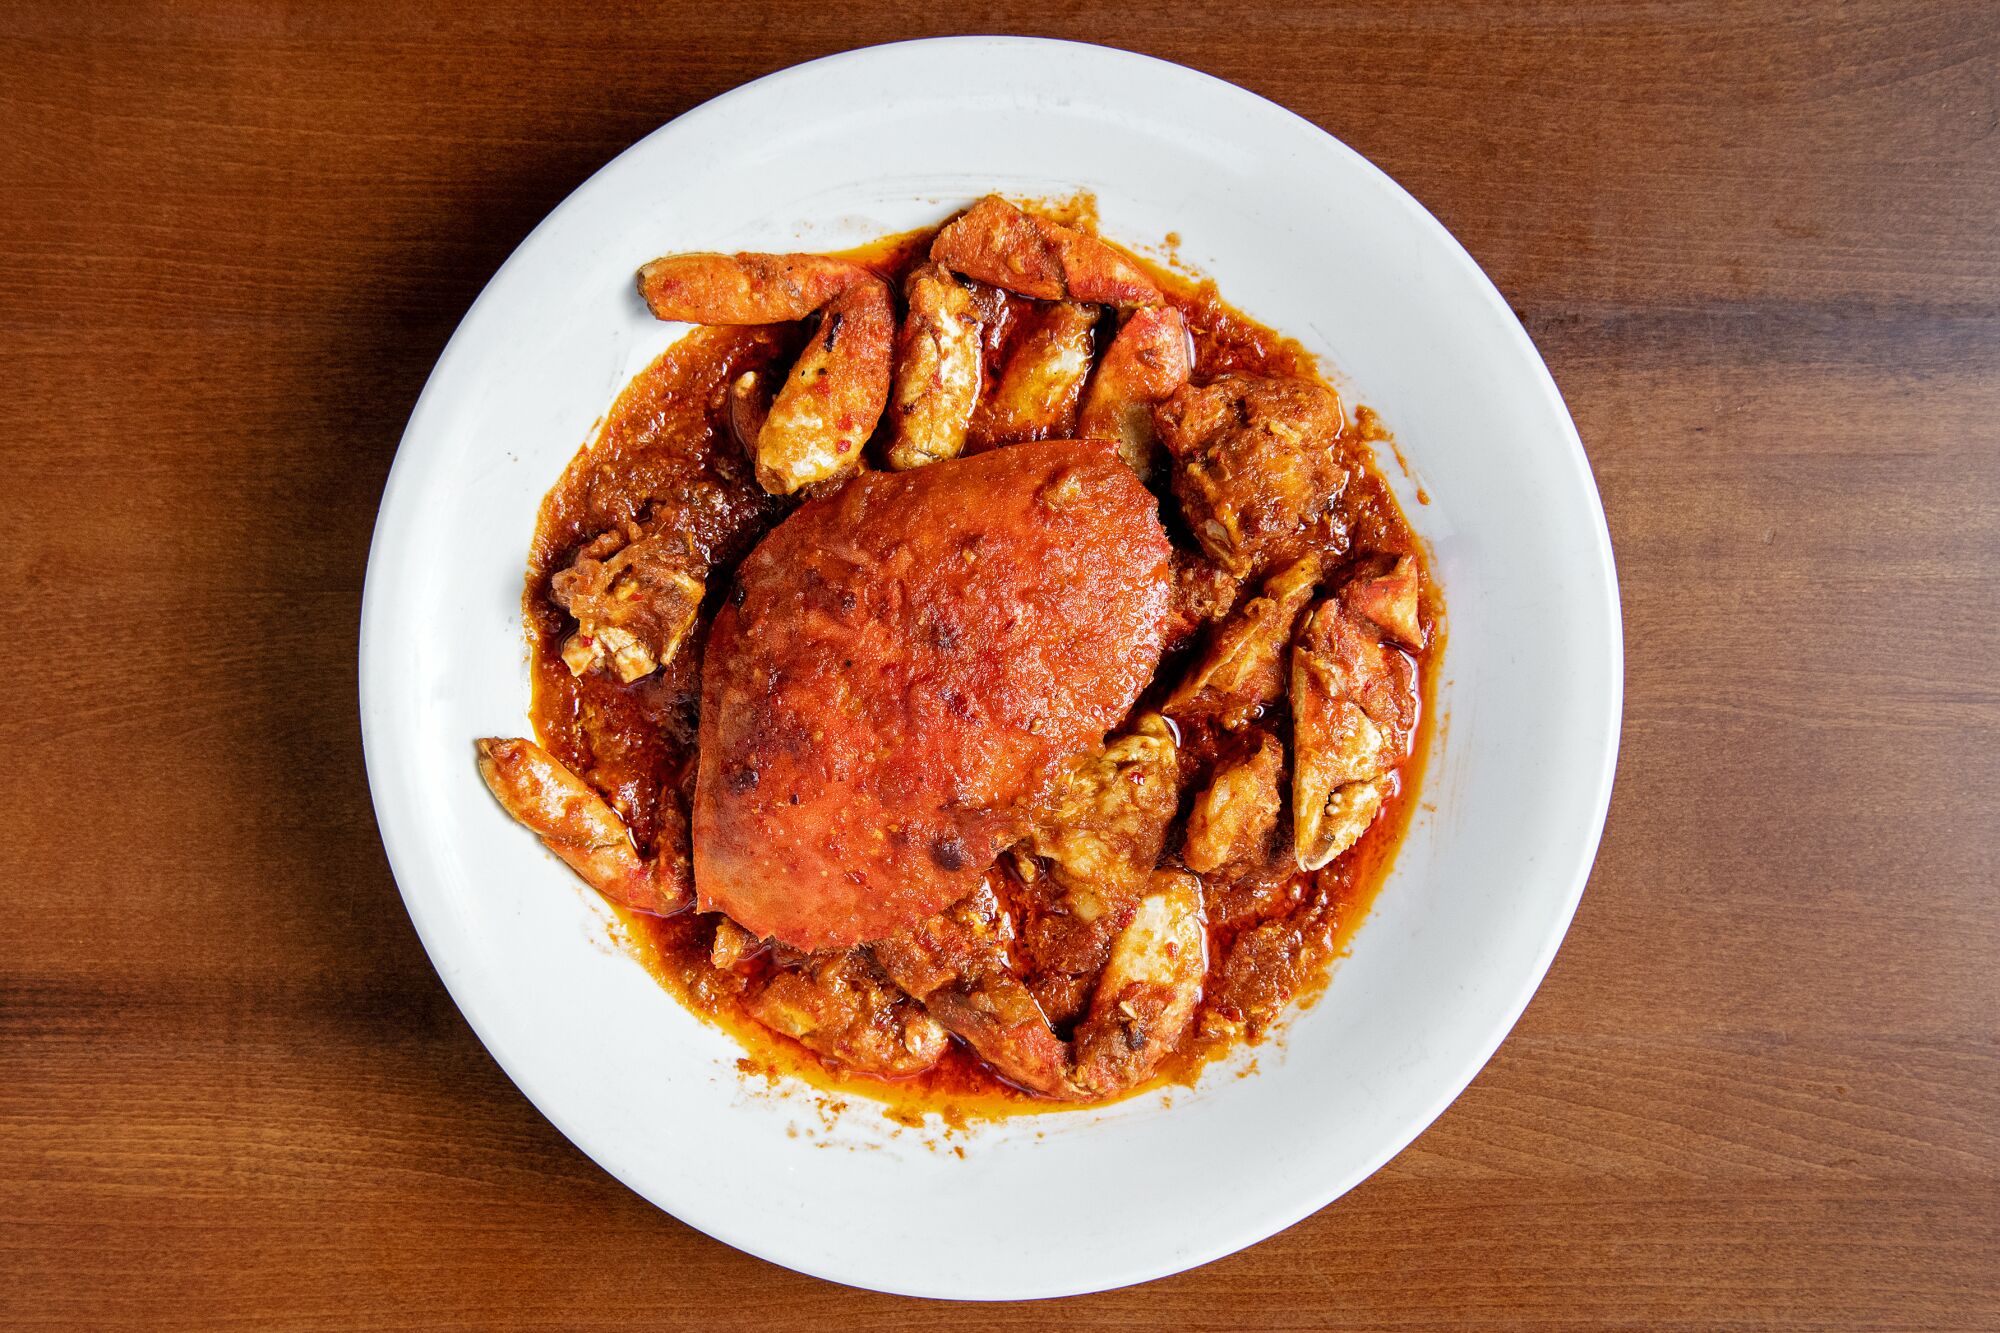 Crab covered in red sauce served on a white plate.